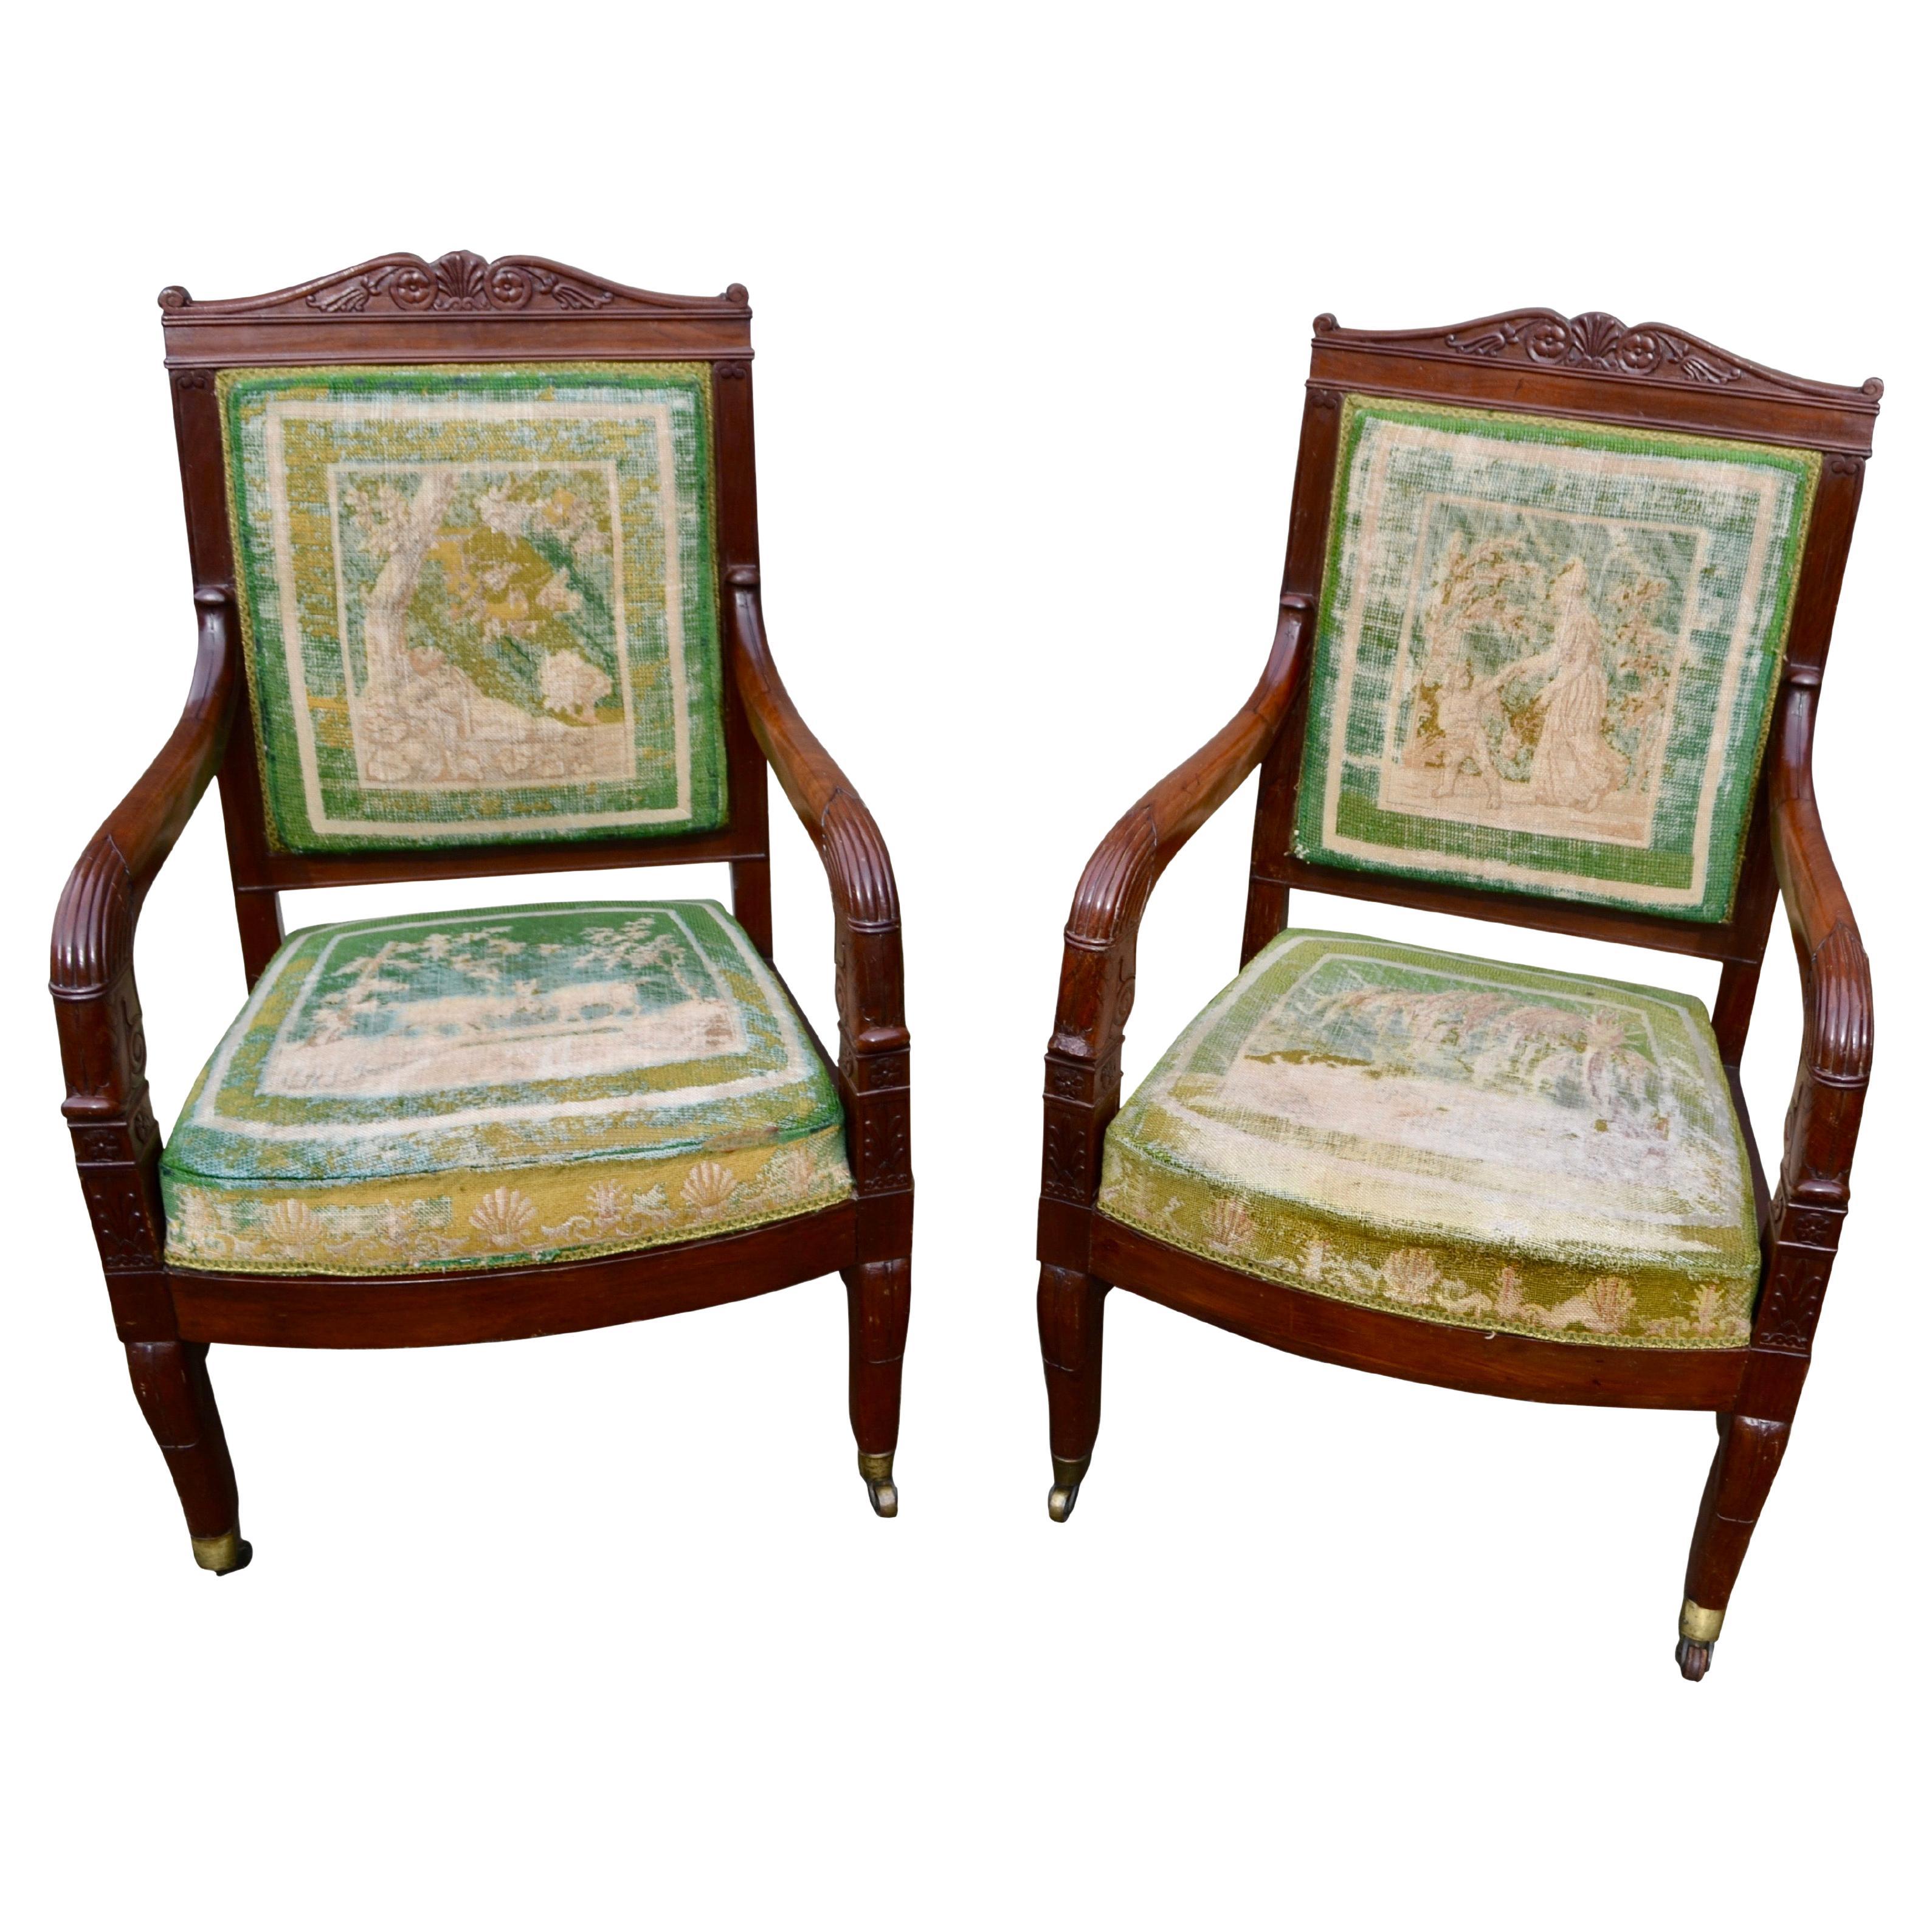 Pair of French Empire Mahogany Armchairs One Stamped J Louis